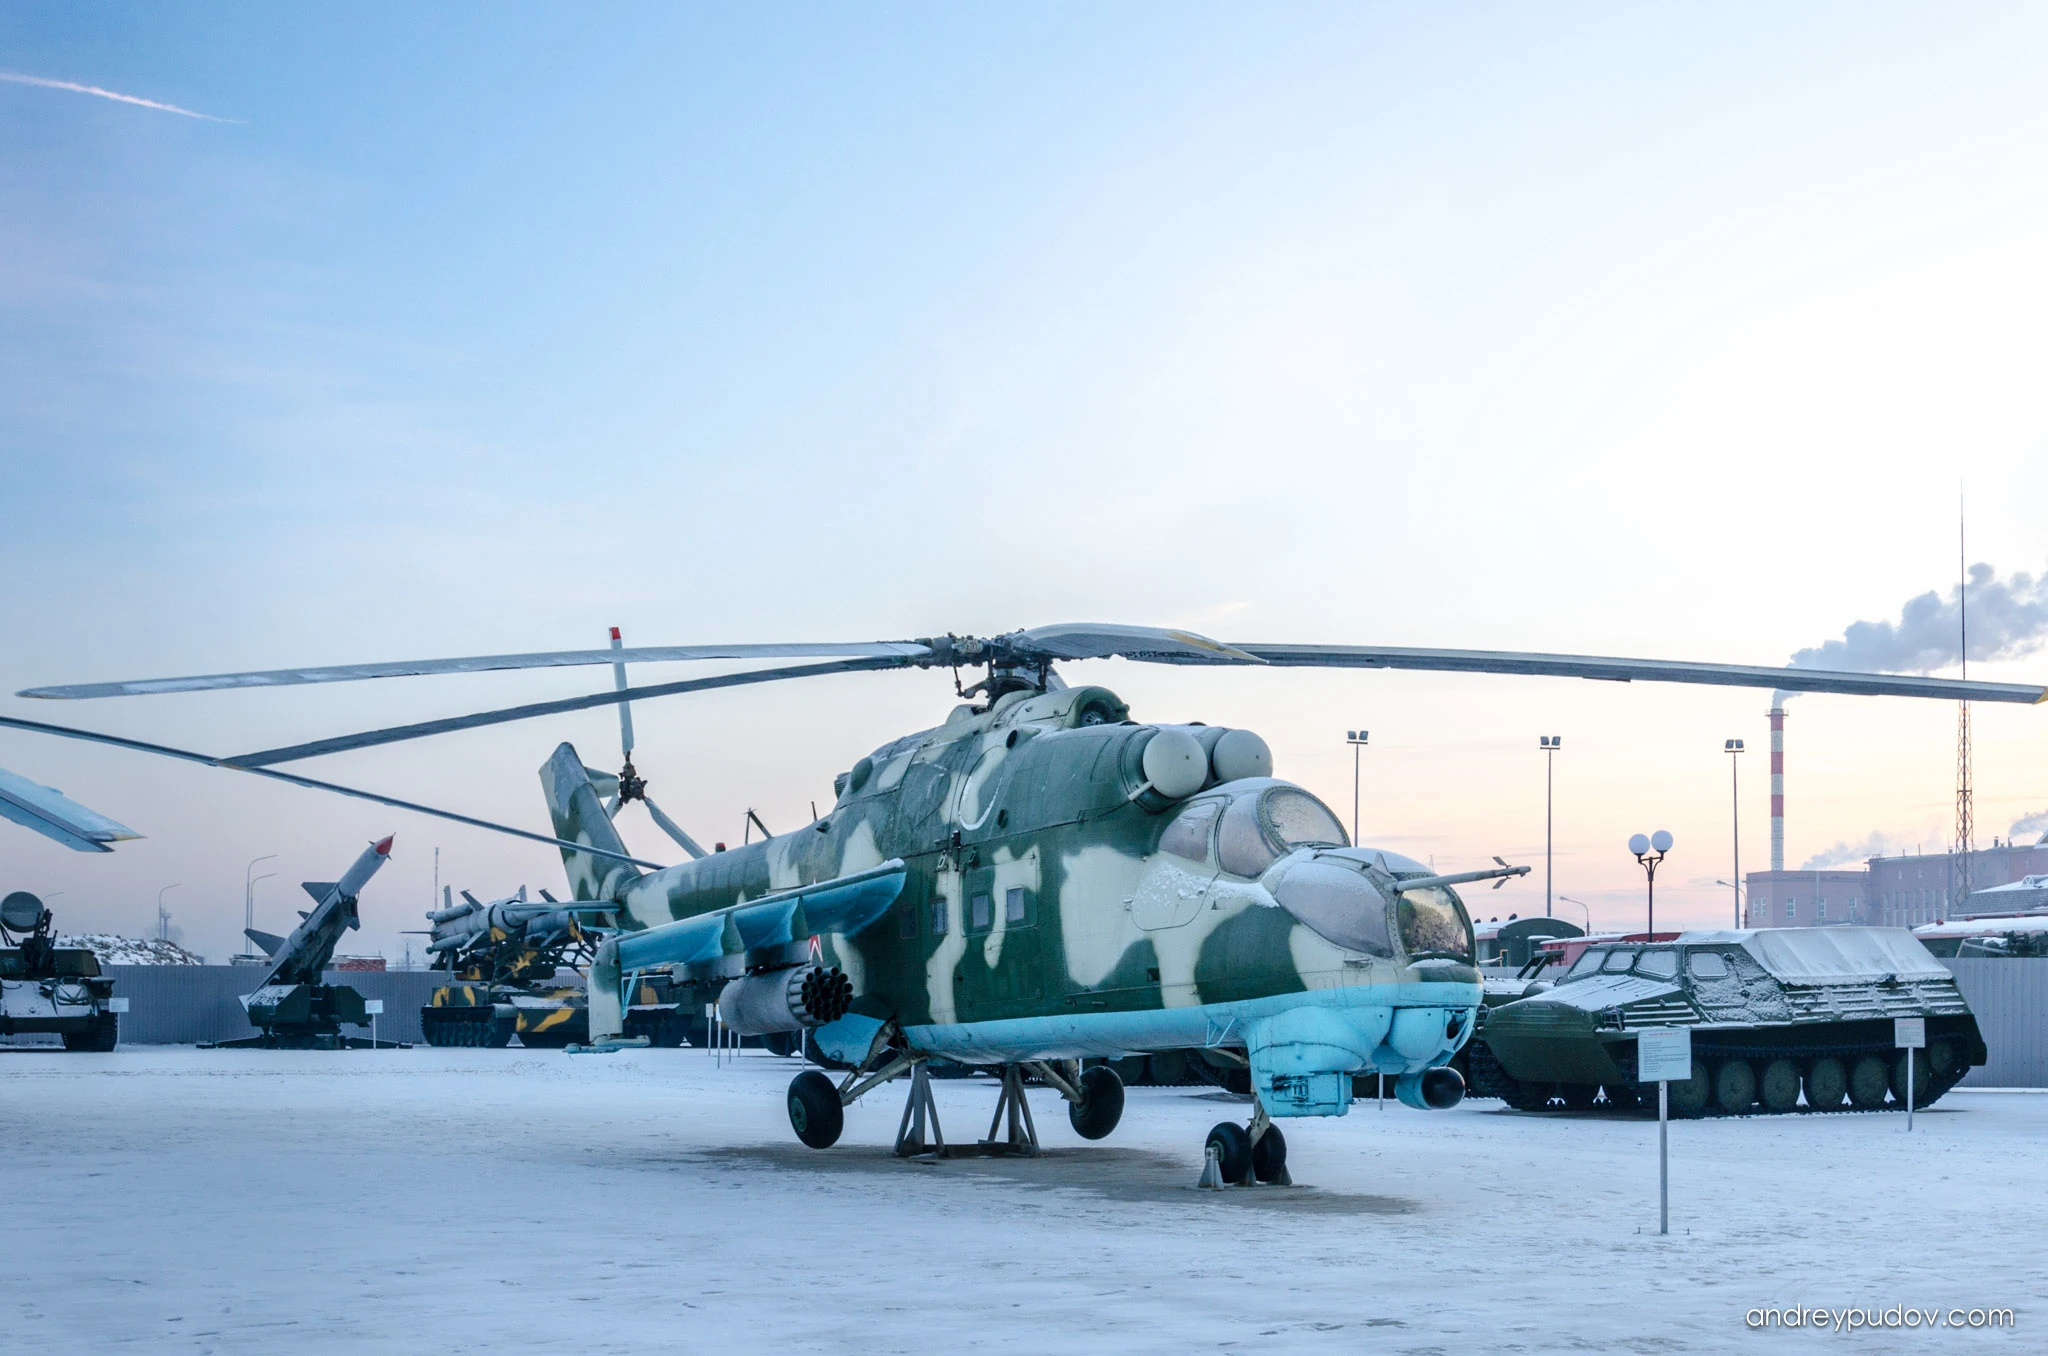 The Mil Mi-24 is a large helicopter gunship, attack helicopter, and low-capacity troop transport with room for eight passengers. It is produced by Mil Moscow Helicopter Plant and has been operated since 1972 by the Soviet Air Force and its successors, along with 48 other nations.